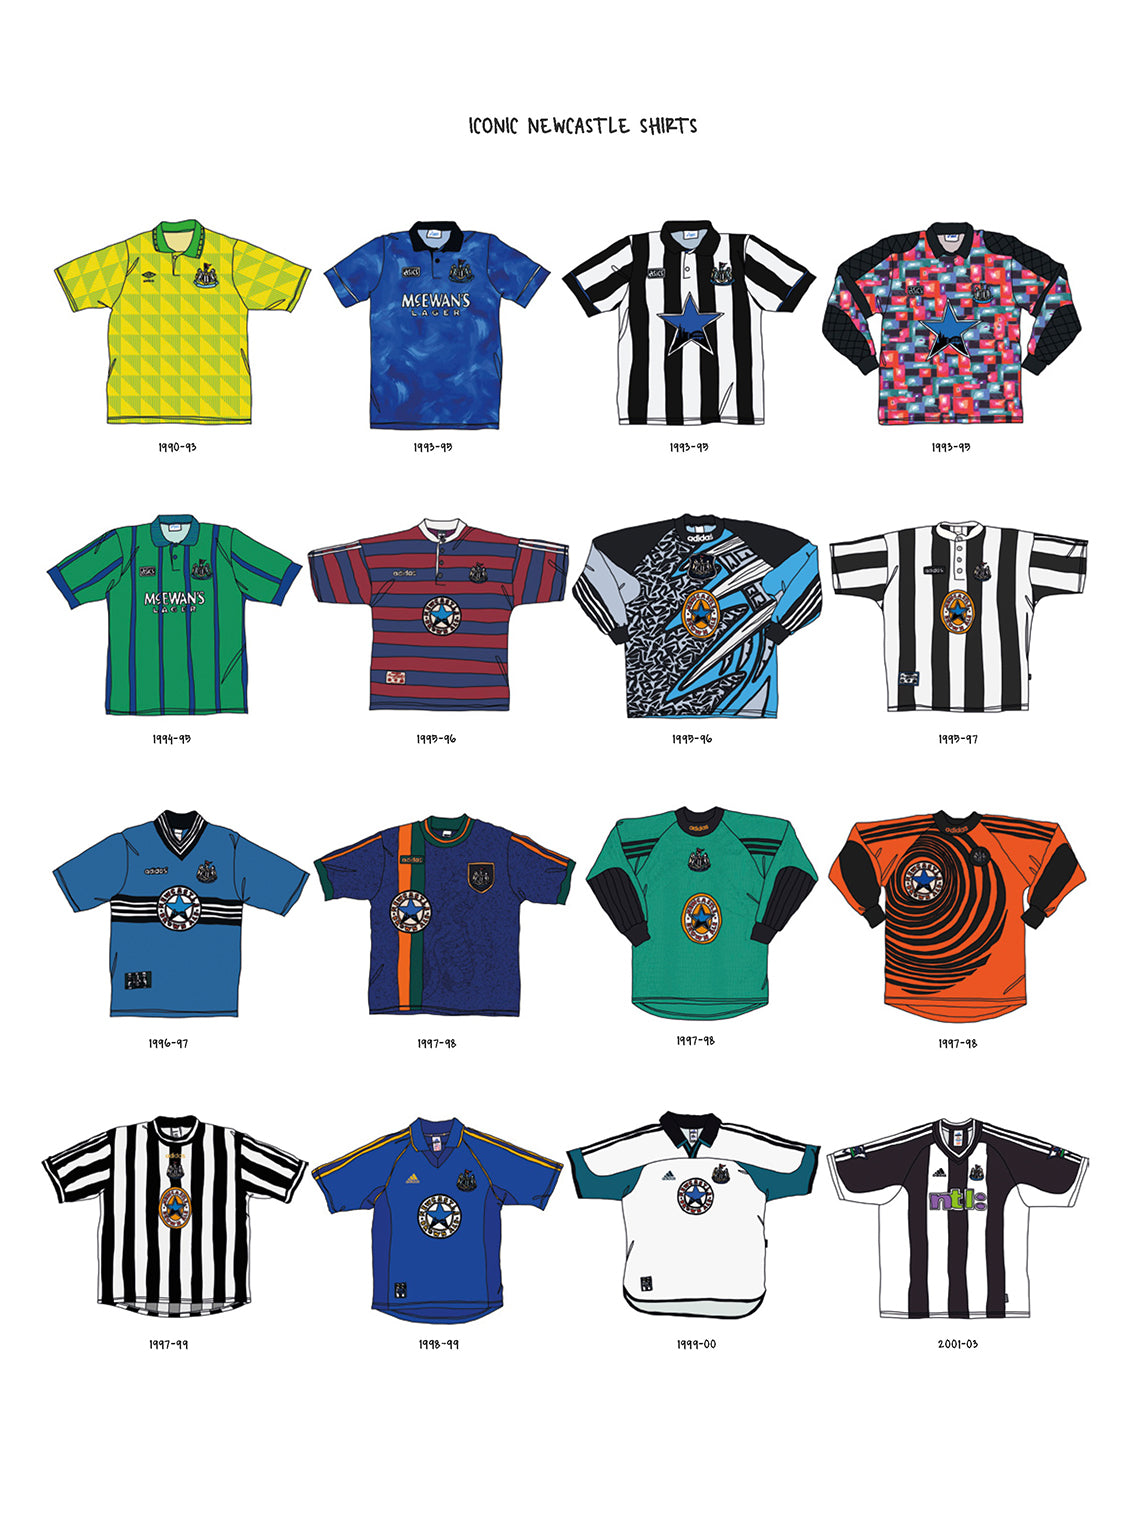 newcastle shirts through the years